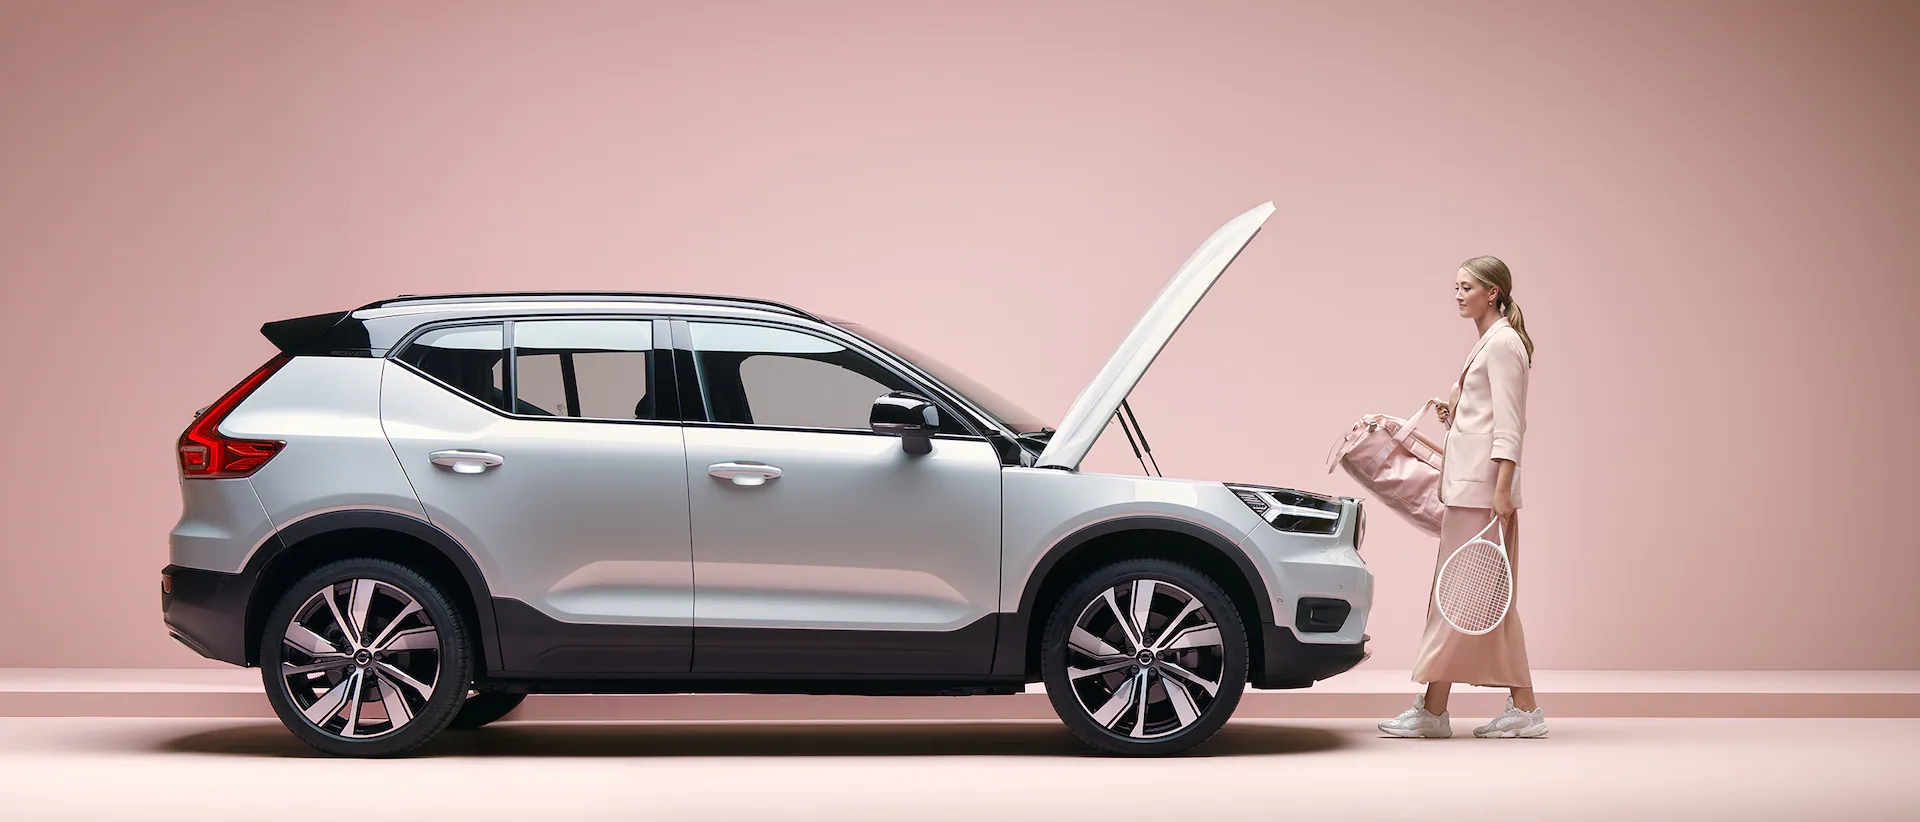 xc40 electric gallery 1